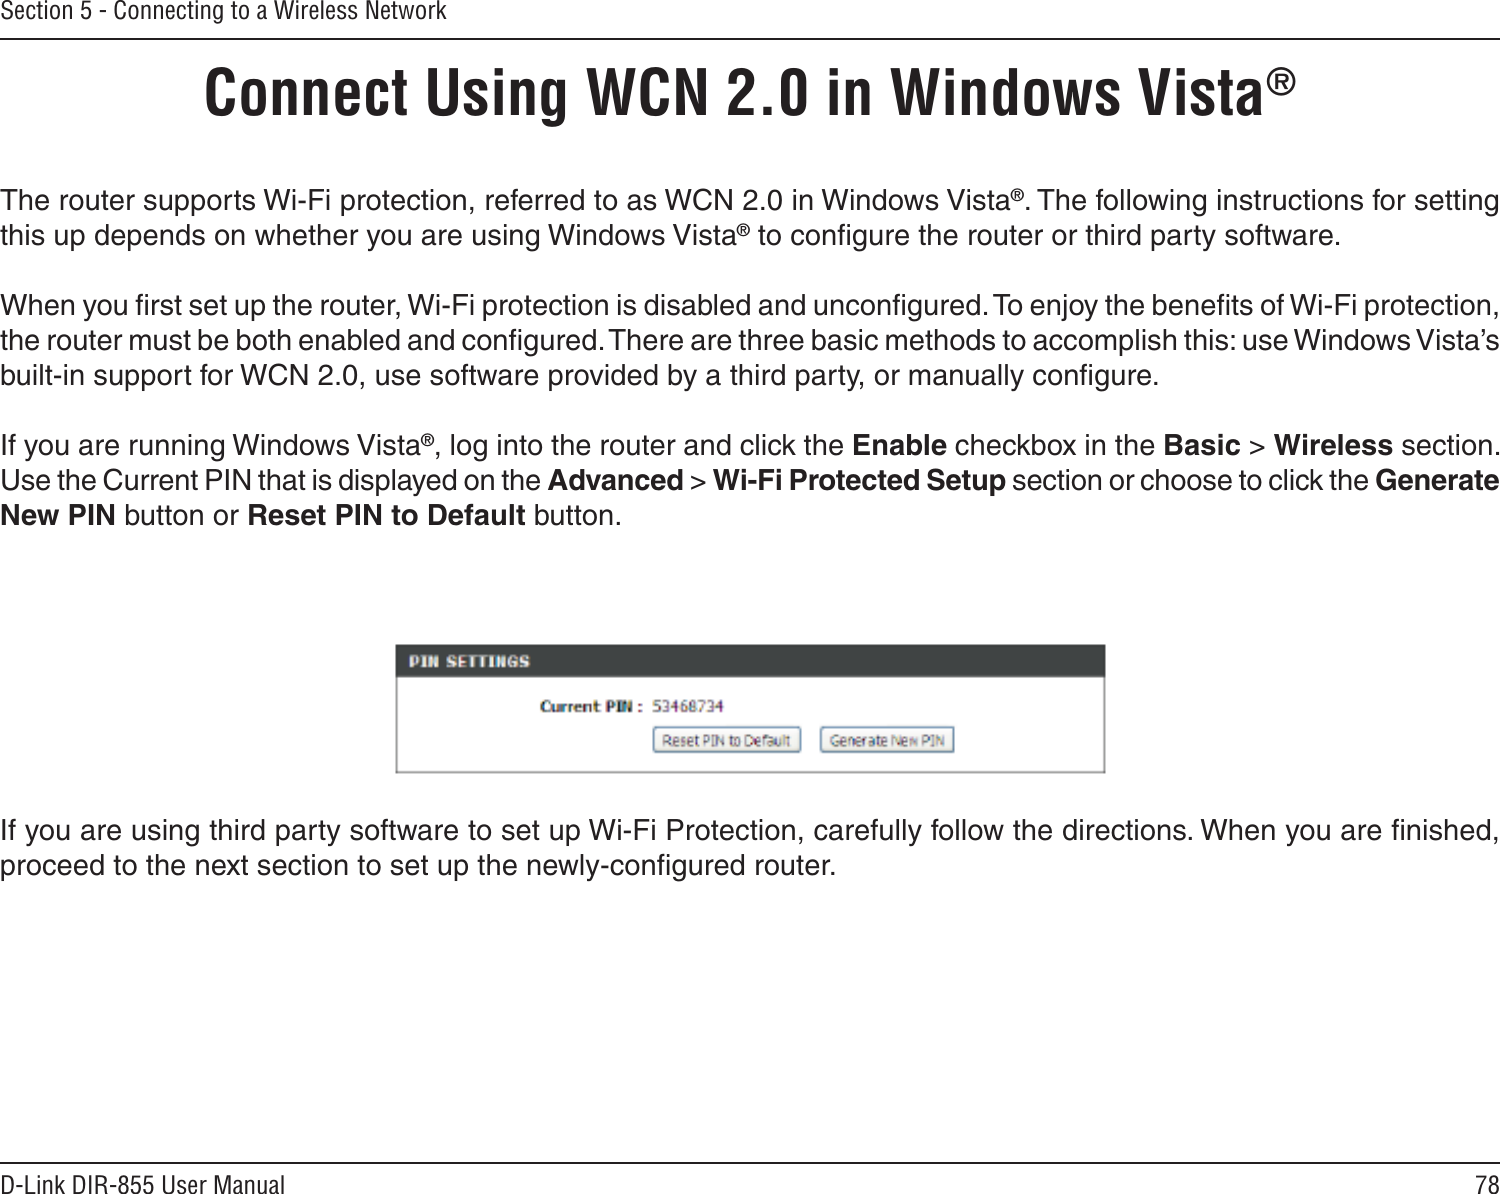 78D-Link DIR-855 User ManualSection 5 - Connecting to a Wireless NetworkConnect Using WCN 2.0 in Windows Vista® The router supports Wi-Fi protection, referred to as WCN 2.0 in Windows Vista®. The following instructions for setting this up depends on whether you are using Windows Vista® to conﬁgure the router or third party software.        When you ﬁrst set up the router, Wi-Fi protection is disabled and unconﬁgured. To enjoy the beneﬁts of Wi-Fi protection, the router must be both enabled and conﬁgured. There are three basic methods to accomplish this: use Windows Vista’s built-in support for WCN 2.0, use software provided by a third party, or manually conﬁgure. If you are running Windows Vista®, log into the router and click the Enable checkbox in the Basic &gt; Wireless section. Use the Current PIN that is displayed on the Advanced &gt; Wi-Fi Protected Setup section or choose to click the Generate New PIN button or Reset PIN to Default button. If you are using third party software to set up Wi-Fi Protection, carefully follow the directions. When you are ﬁnished, proceed to the next section to set up the newly-conﬁgured router. 